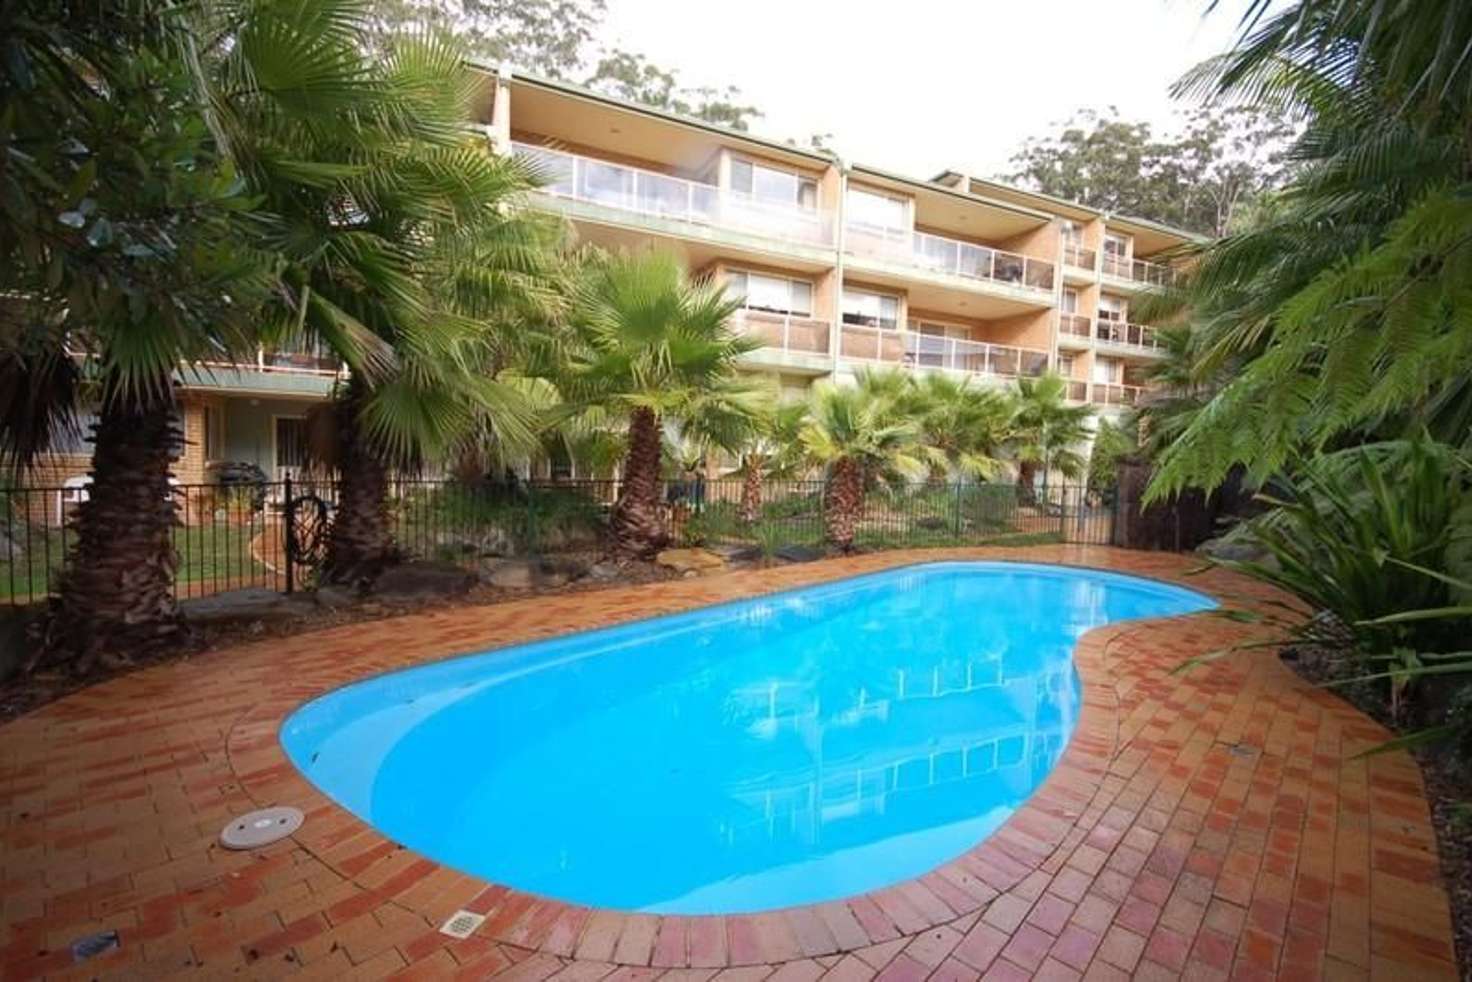 Main view of Homely unit listing, 11/117 John Whiteway Drive, Gosford NSW 2250